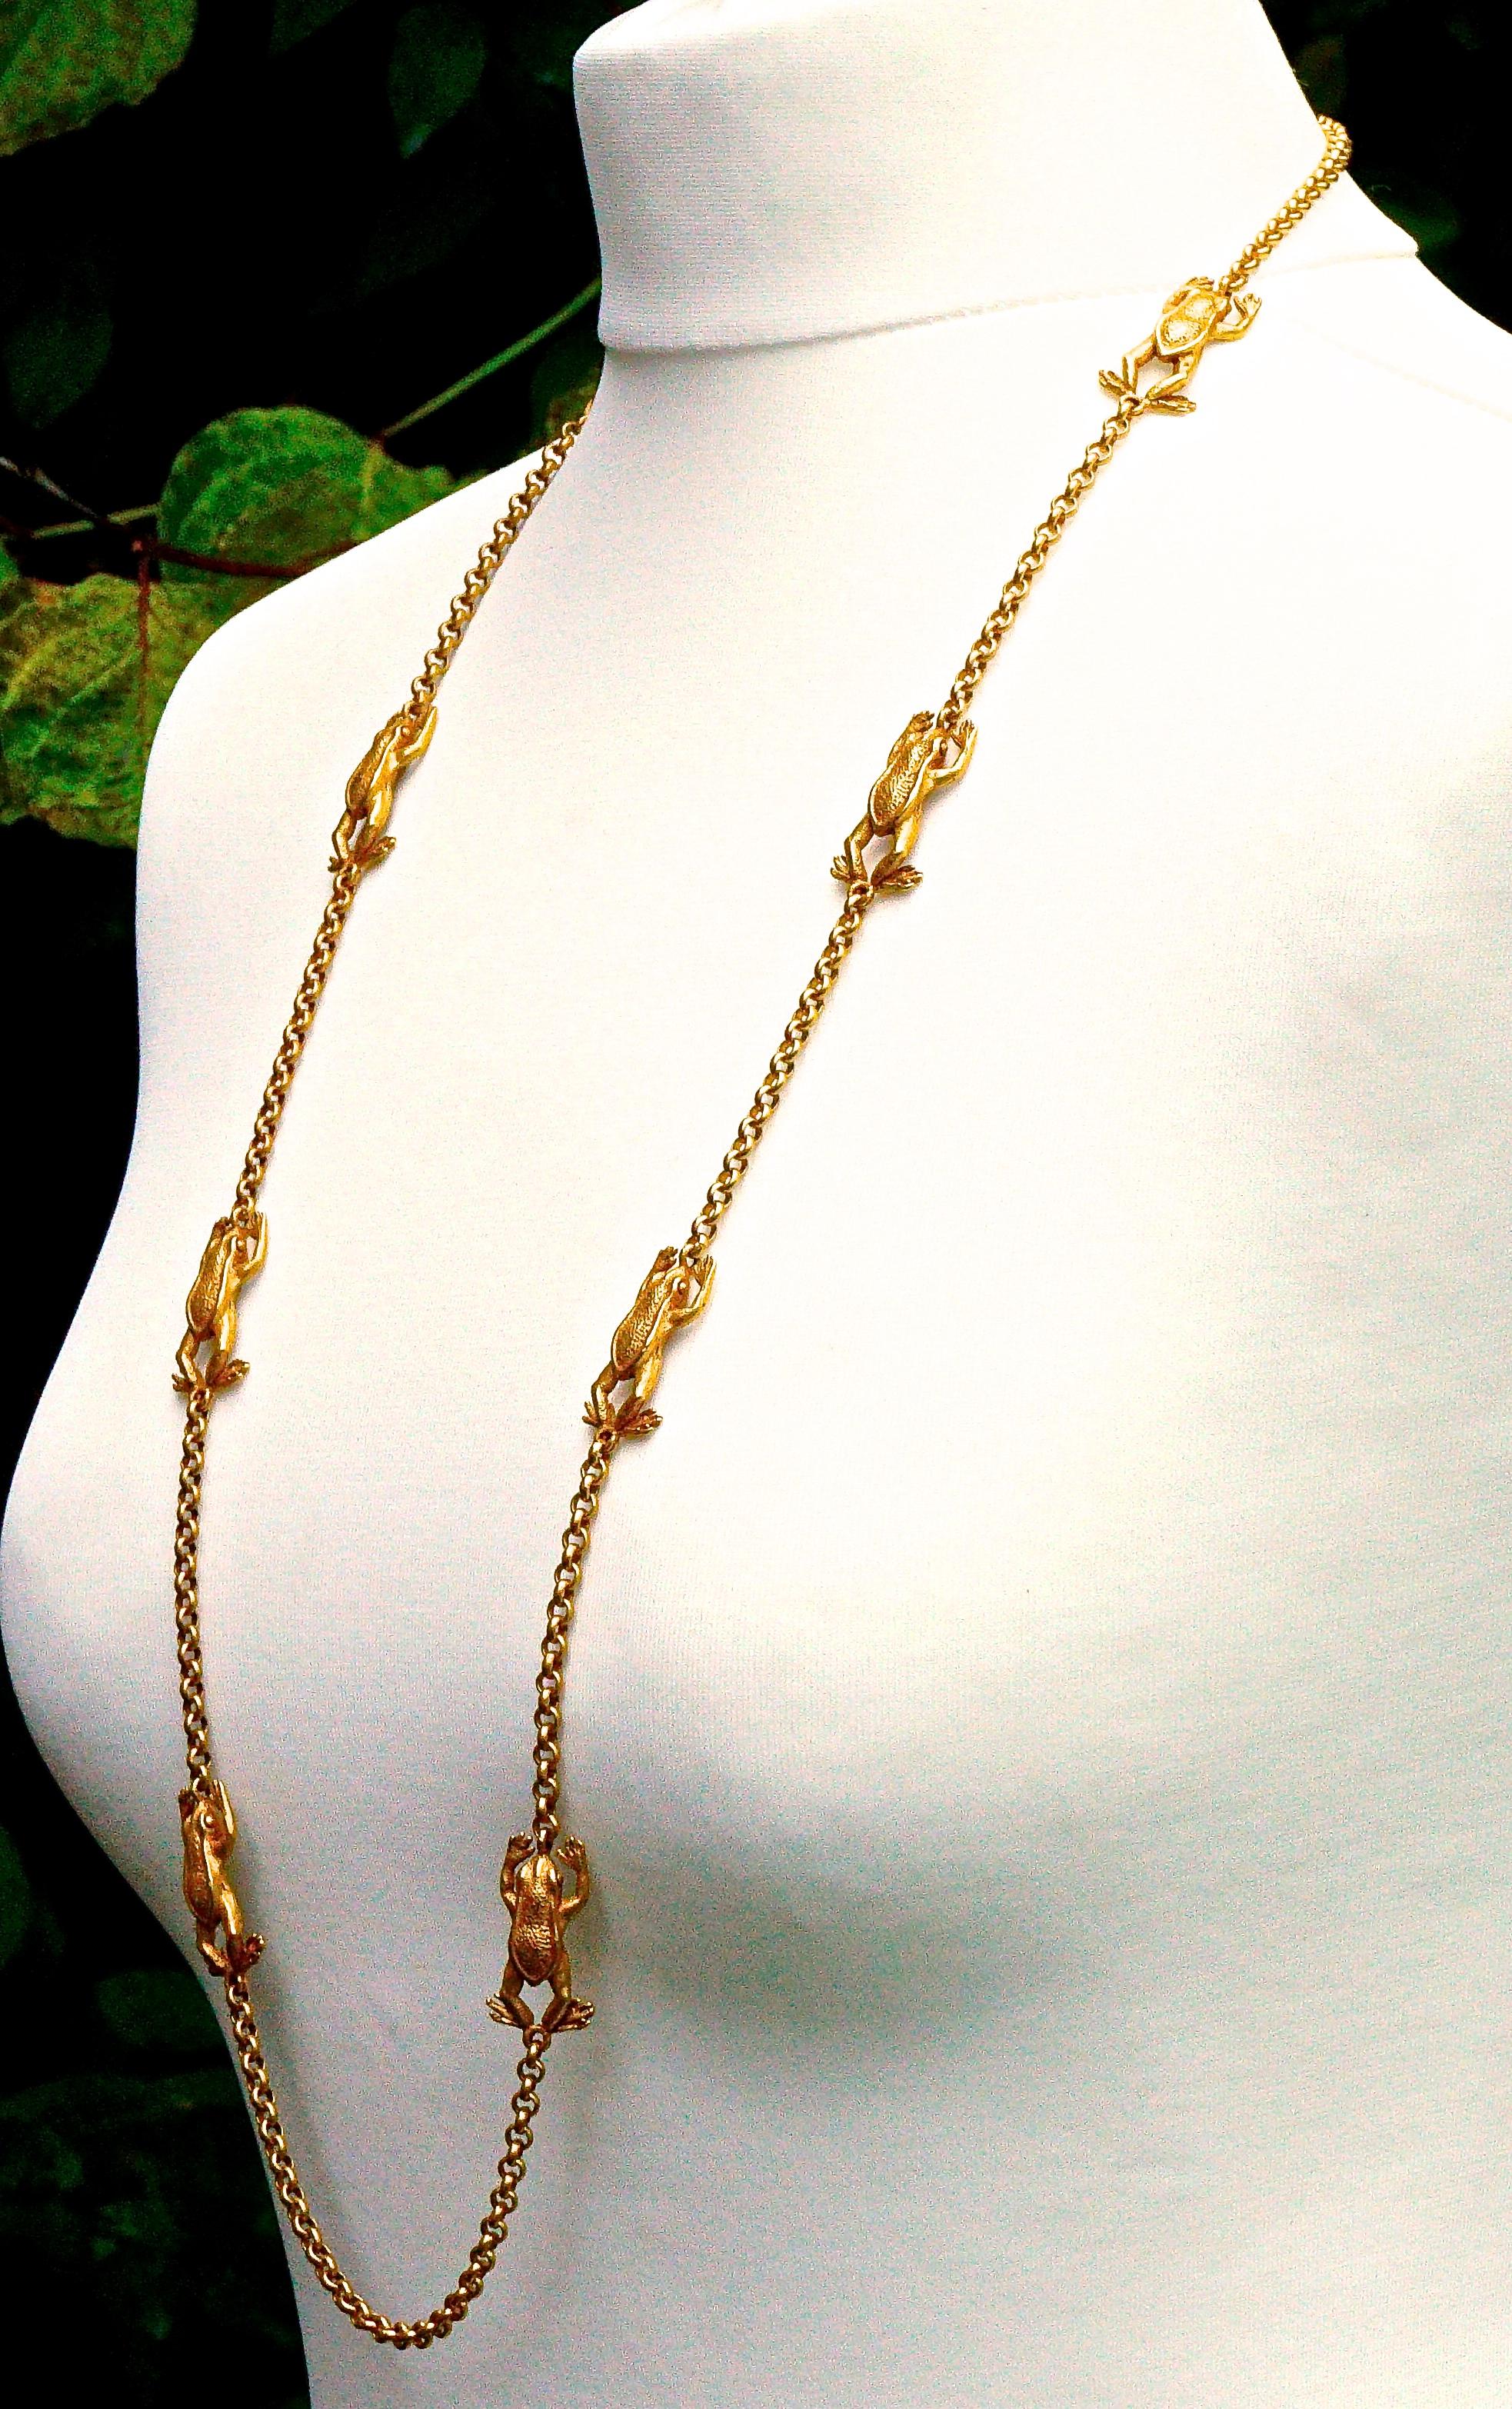 Askew London Long Gold Plated Frog Link Chain Necklace with a Flower Clasp 3